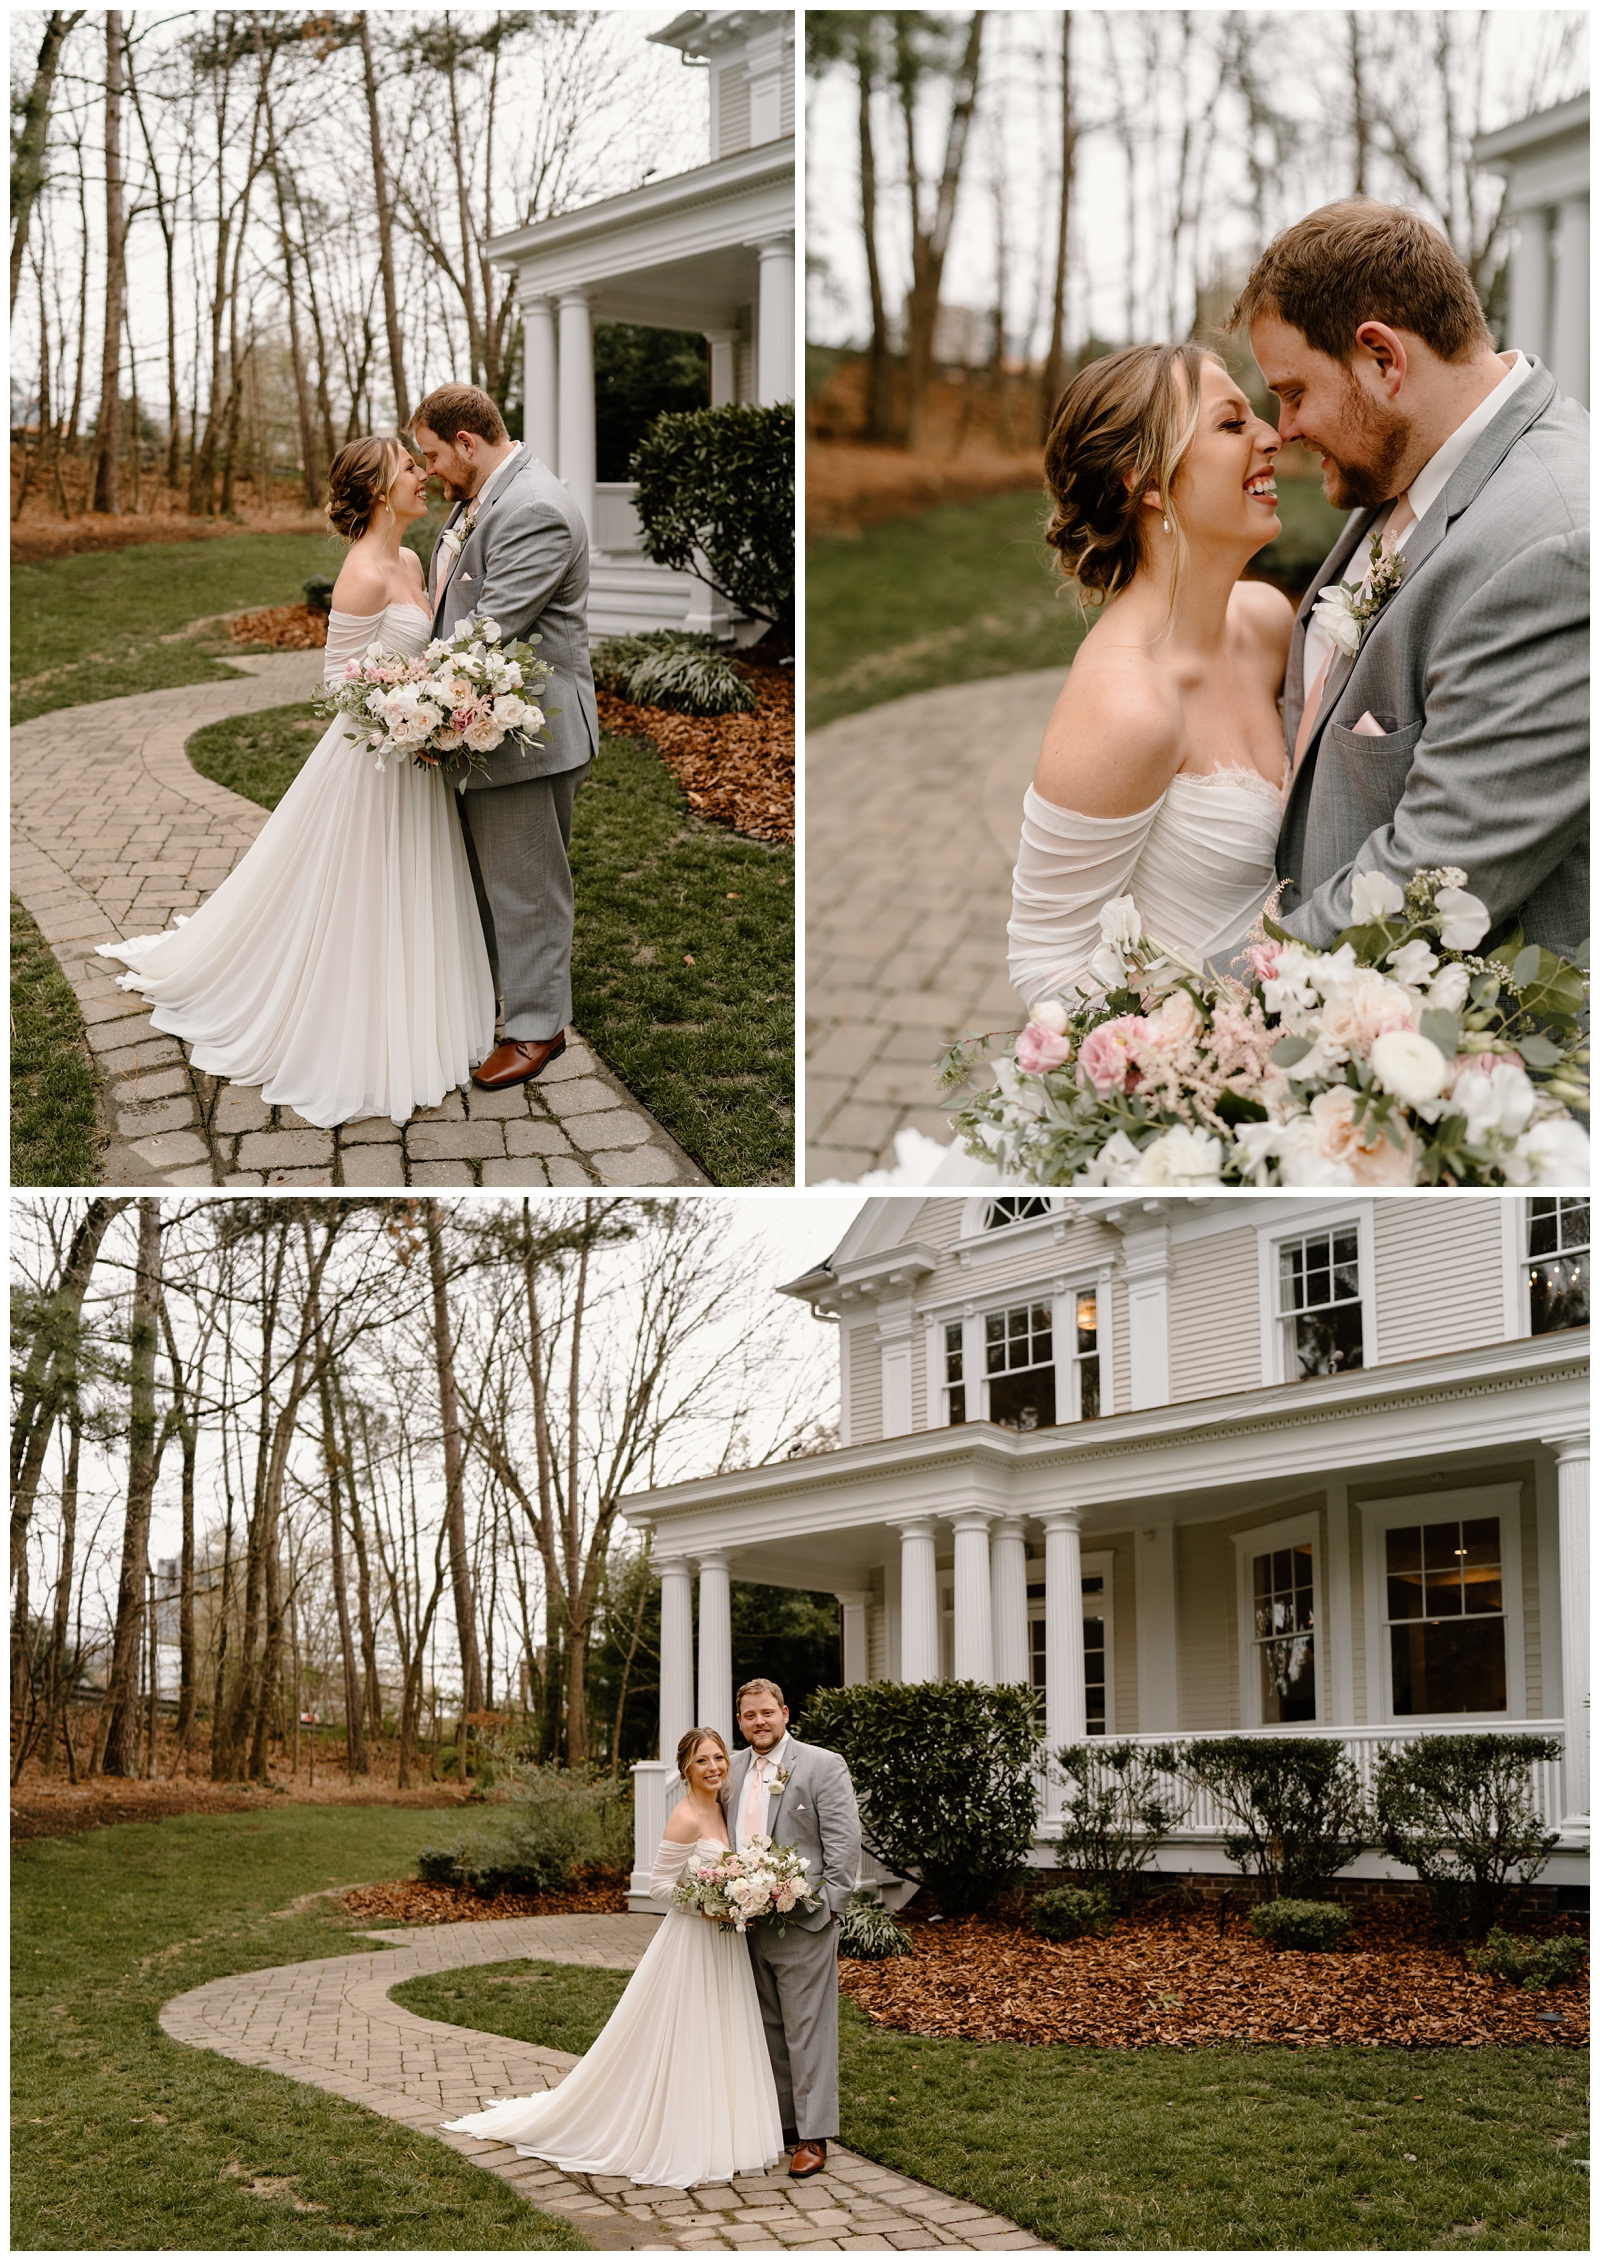 Dreamy bride and groom portraits at their romantic McAlister-Leftwich House wedding in Greensboro, NC by Raleigh and Charlotte photographer